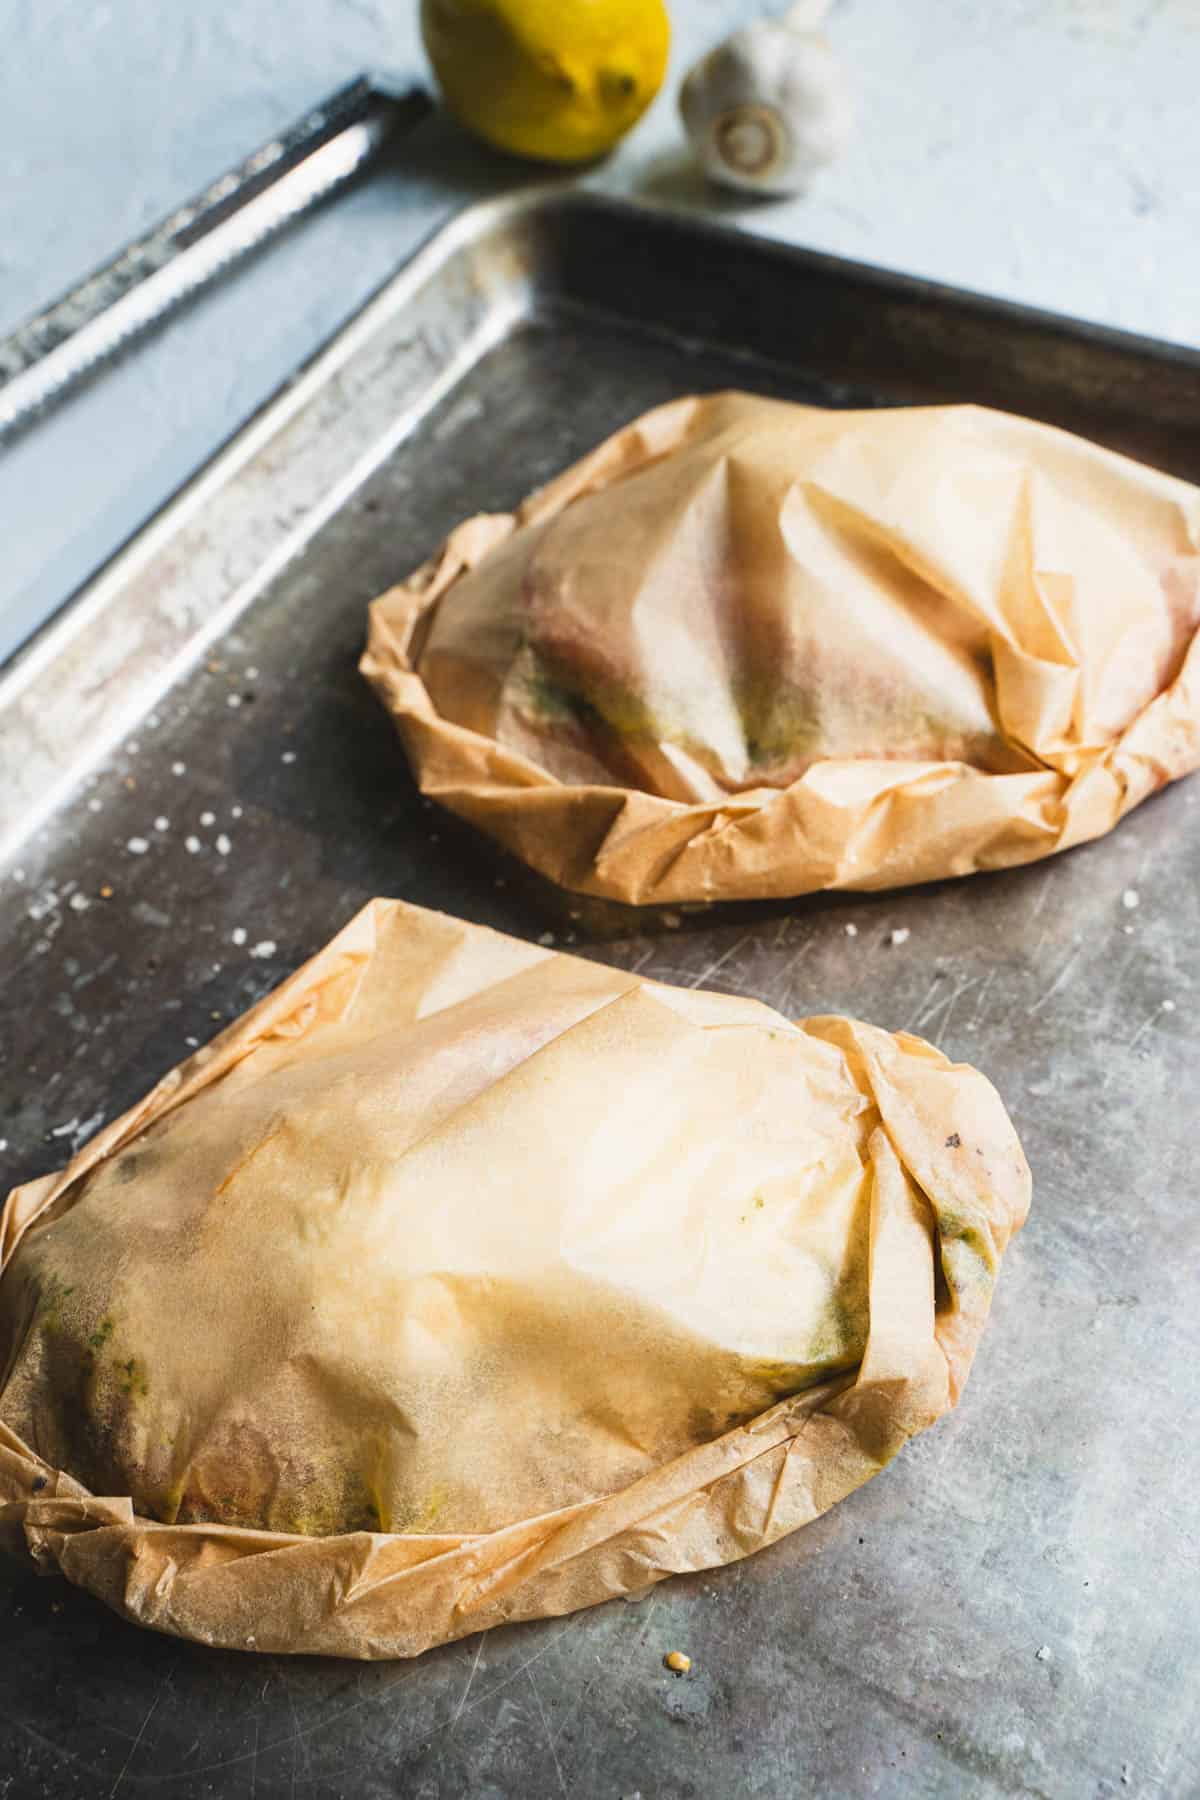 baked pesto chicken breasts and ingredients inside folded and crimped closed parchment bundles on a baking sheet.